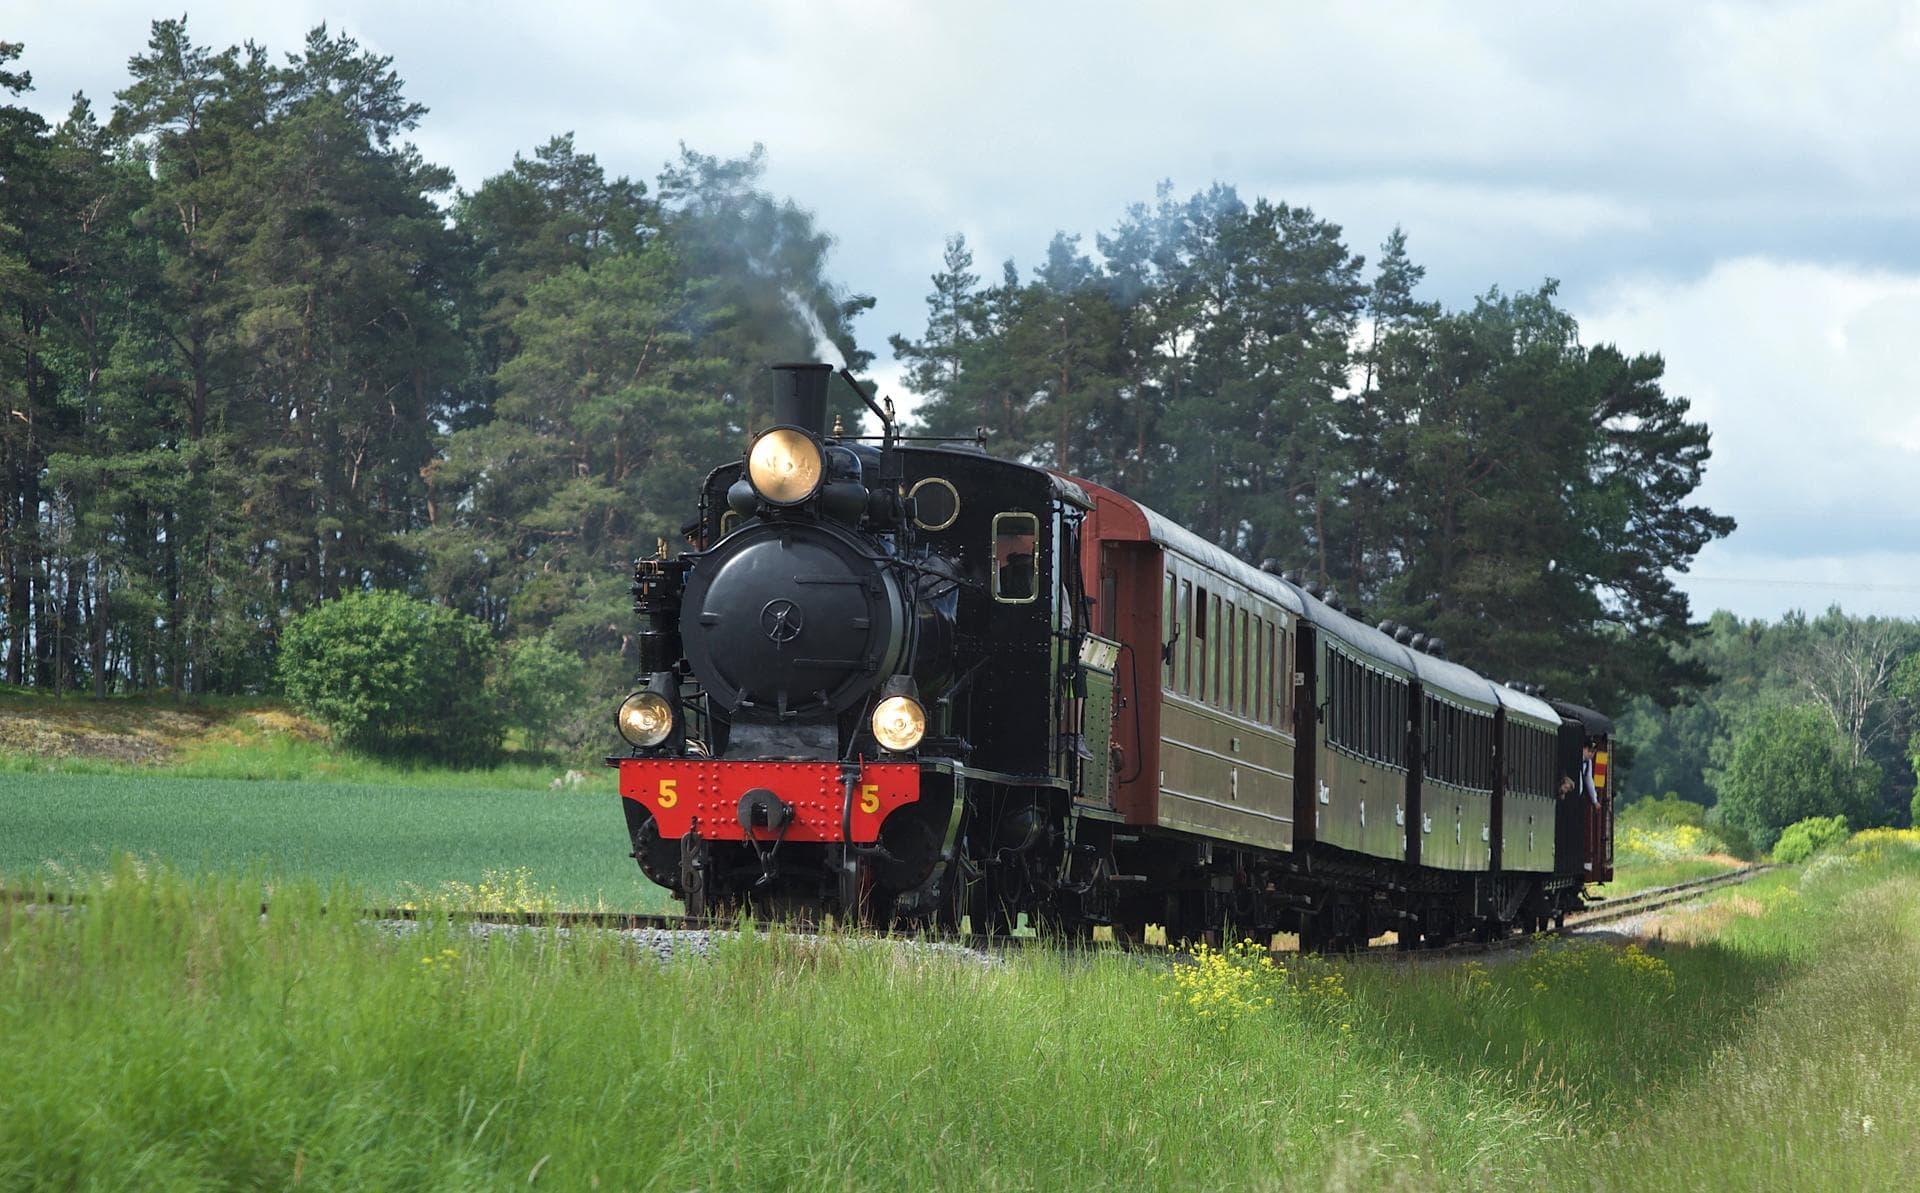 Steam locomotive with heritage cars driving in green summer landscape